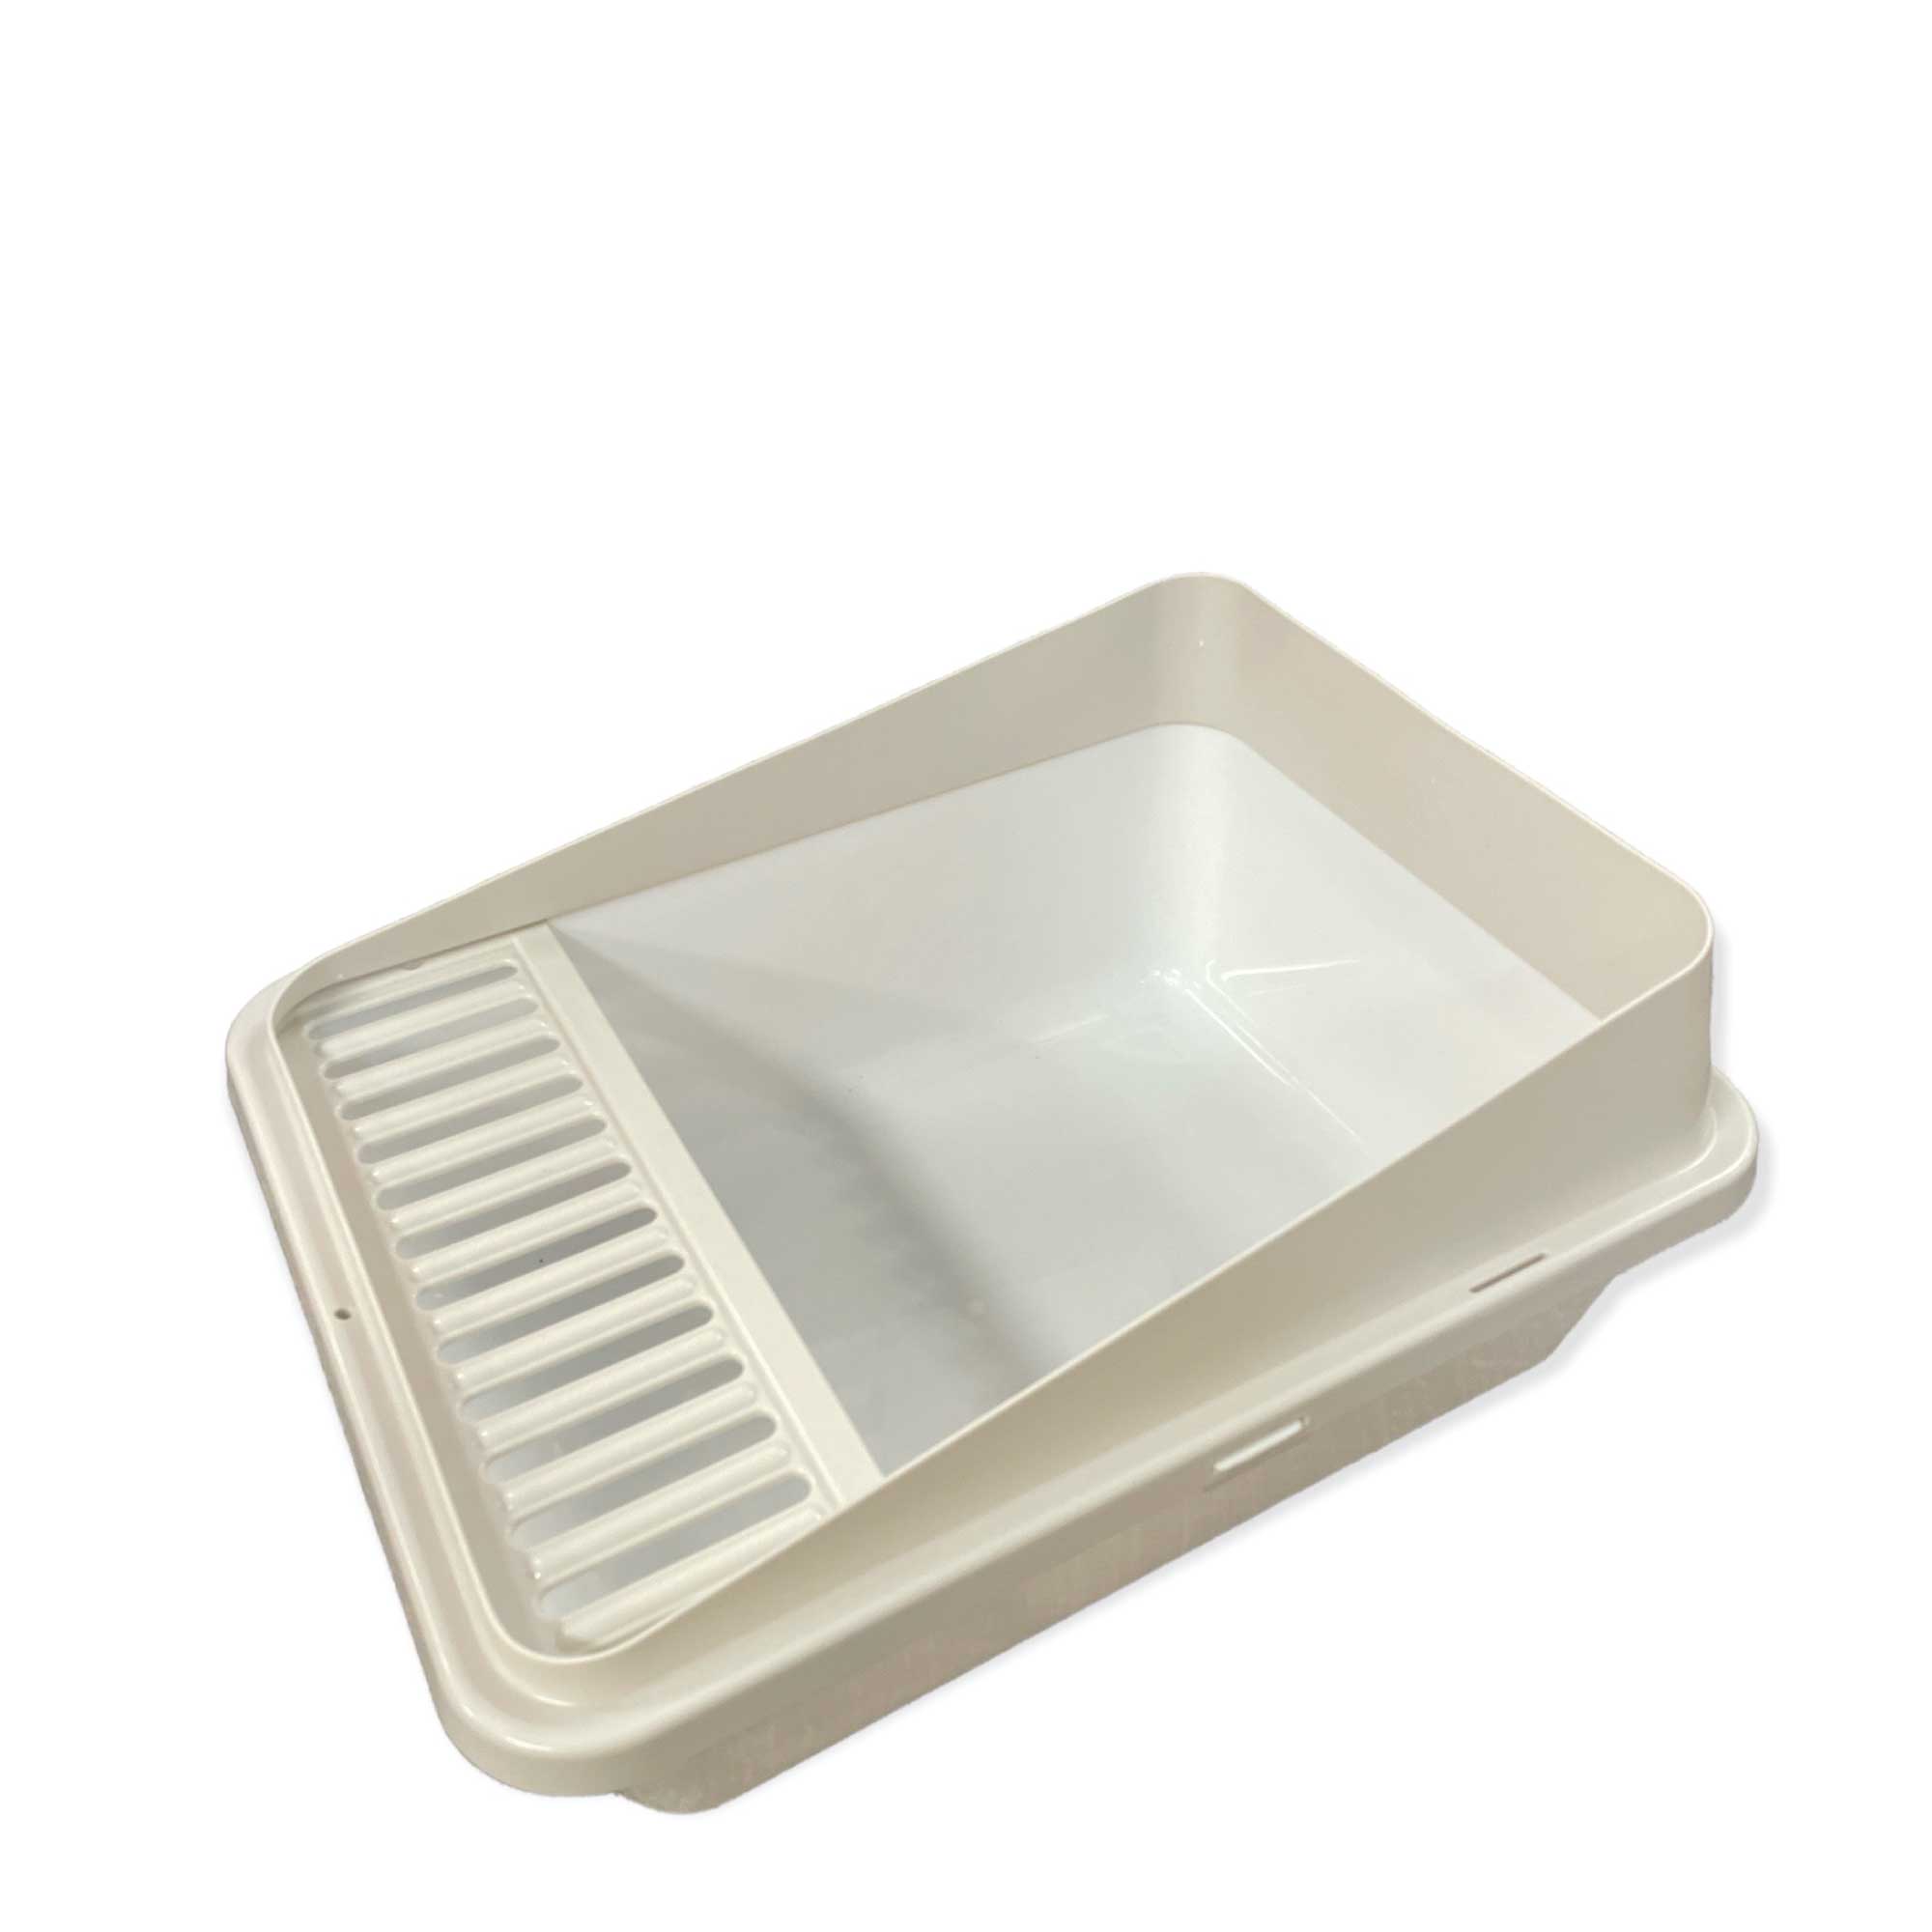 Large High Back Cat Litter Tray - Clean and Fresh